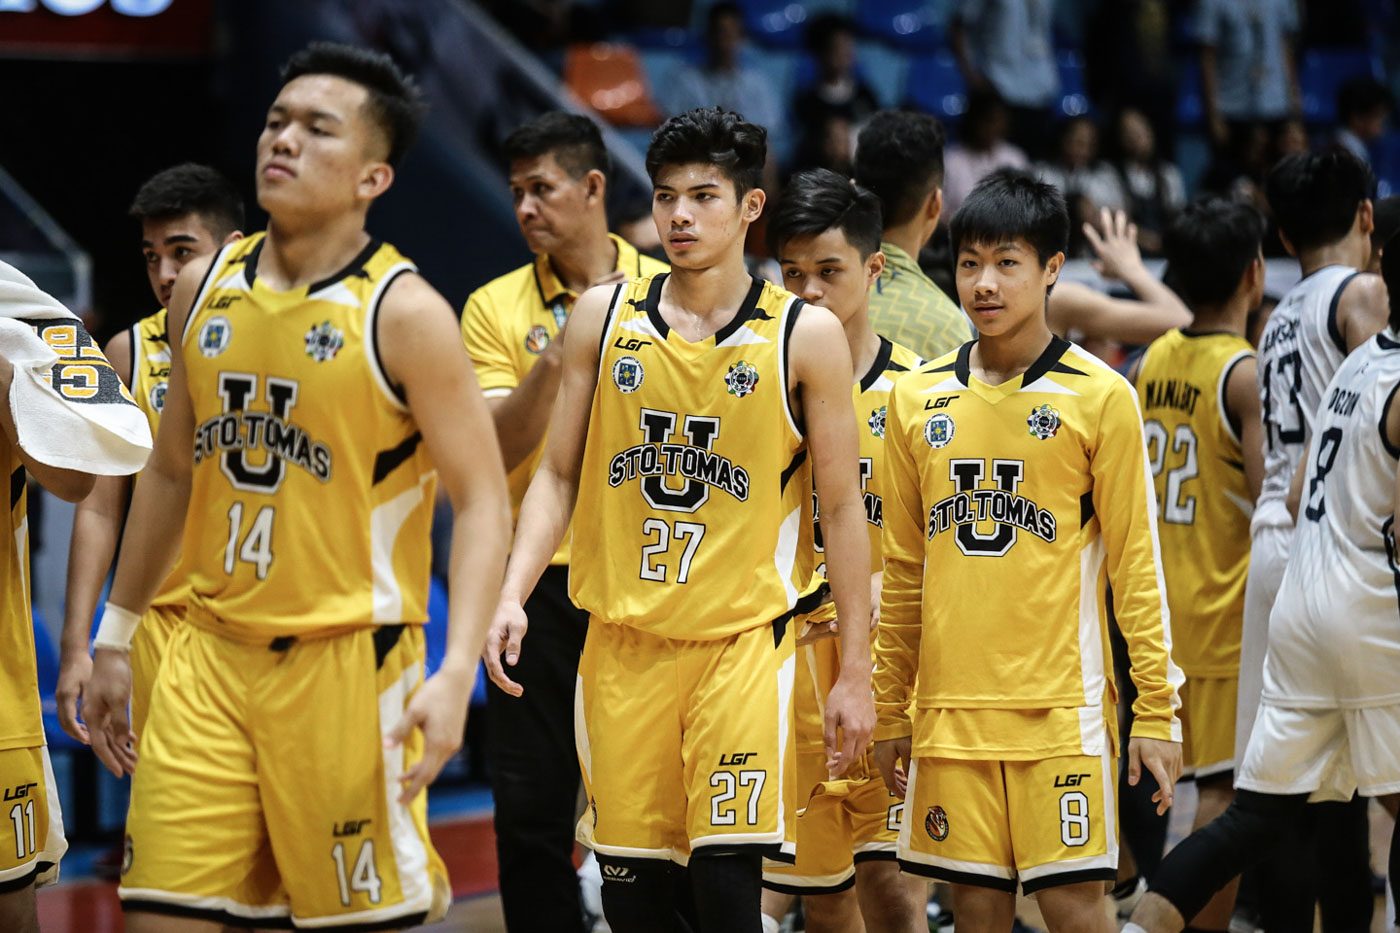 Cantonjos resigns as Jrs head coach, but leaves his heart in UST